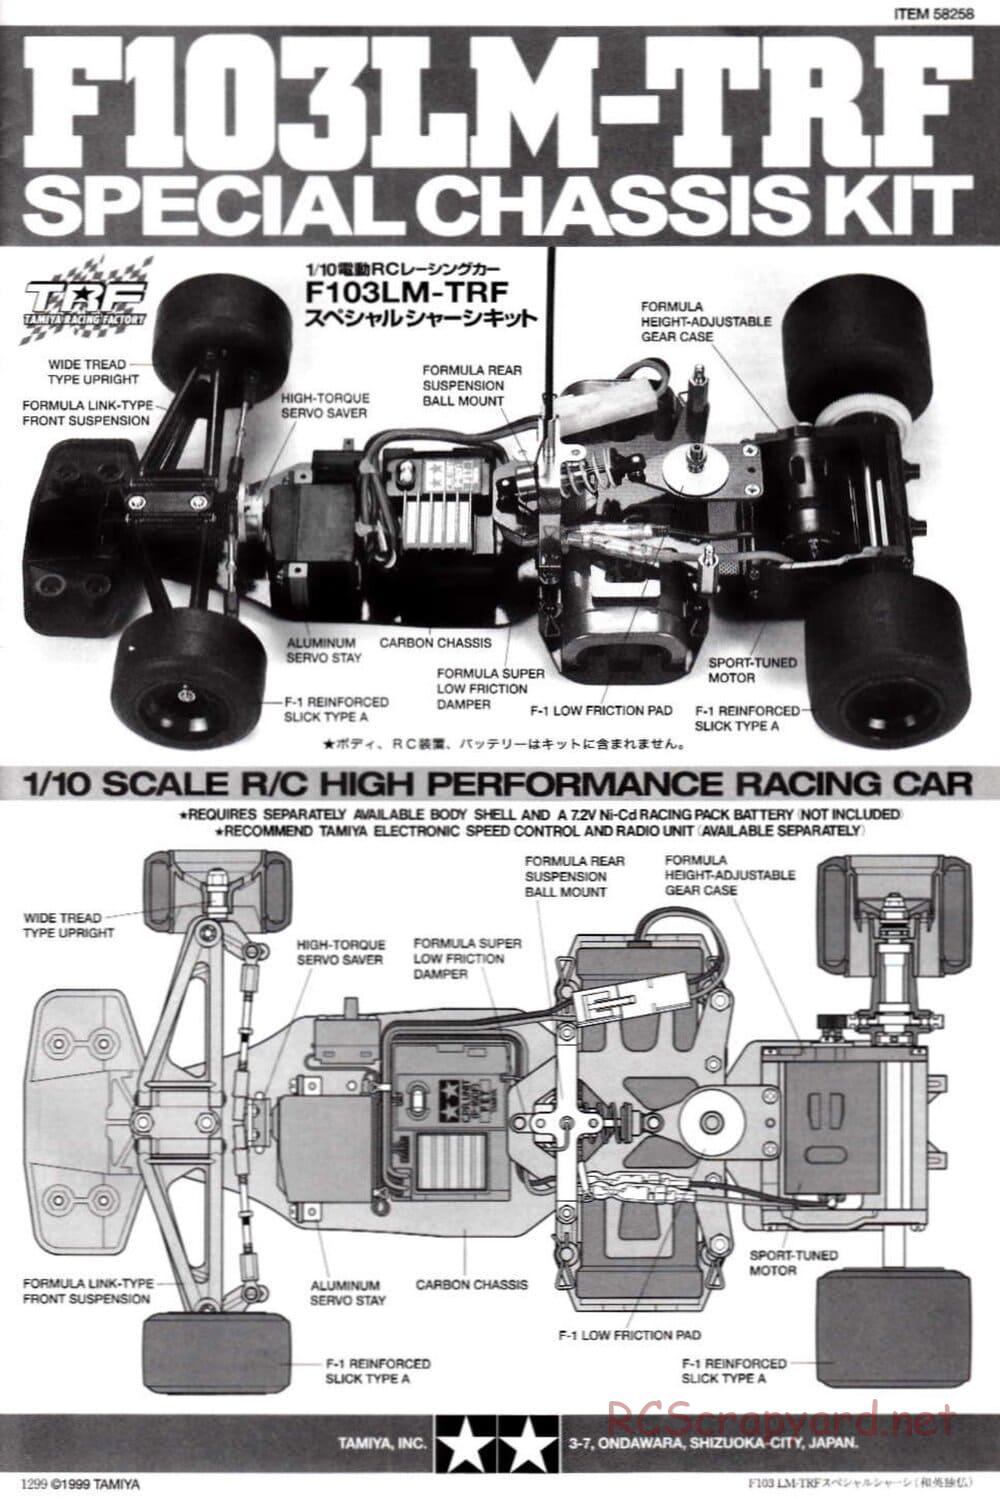 Tamiya - F103LM TRF Special Chassis - Manual - Page 1